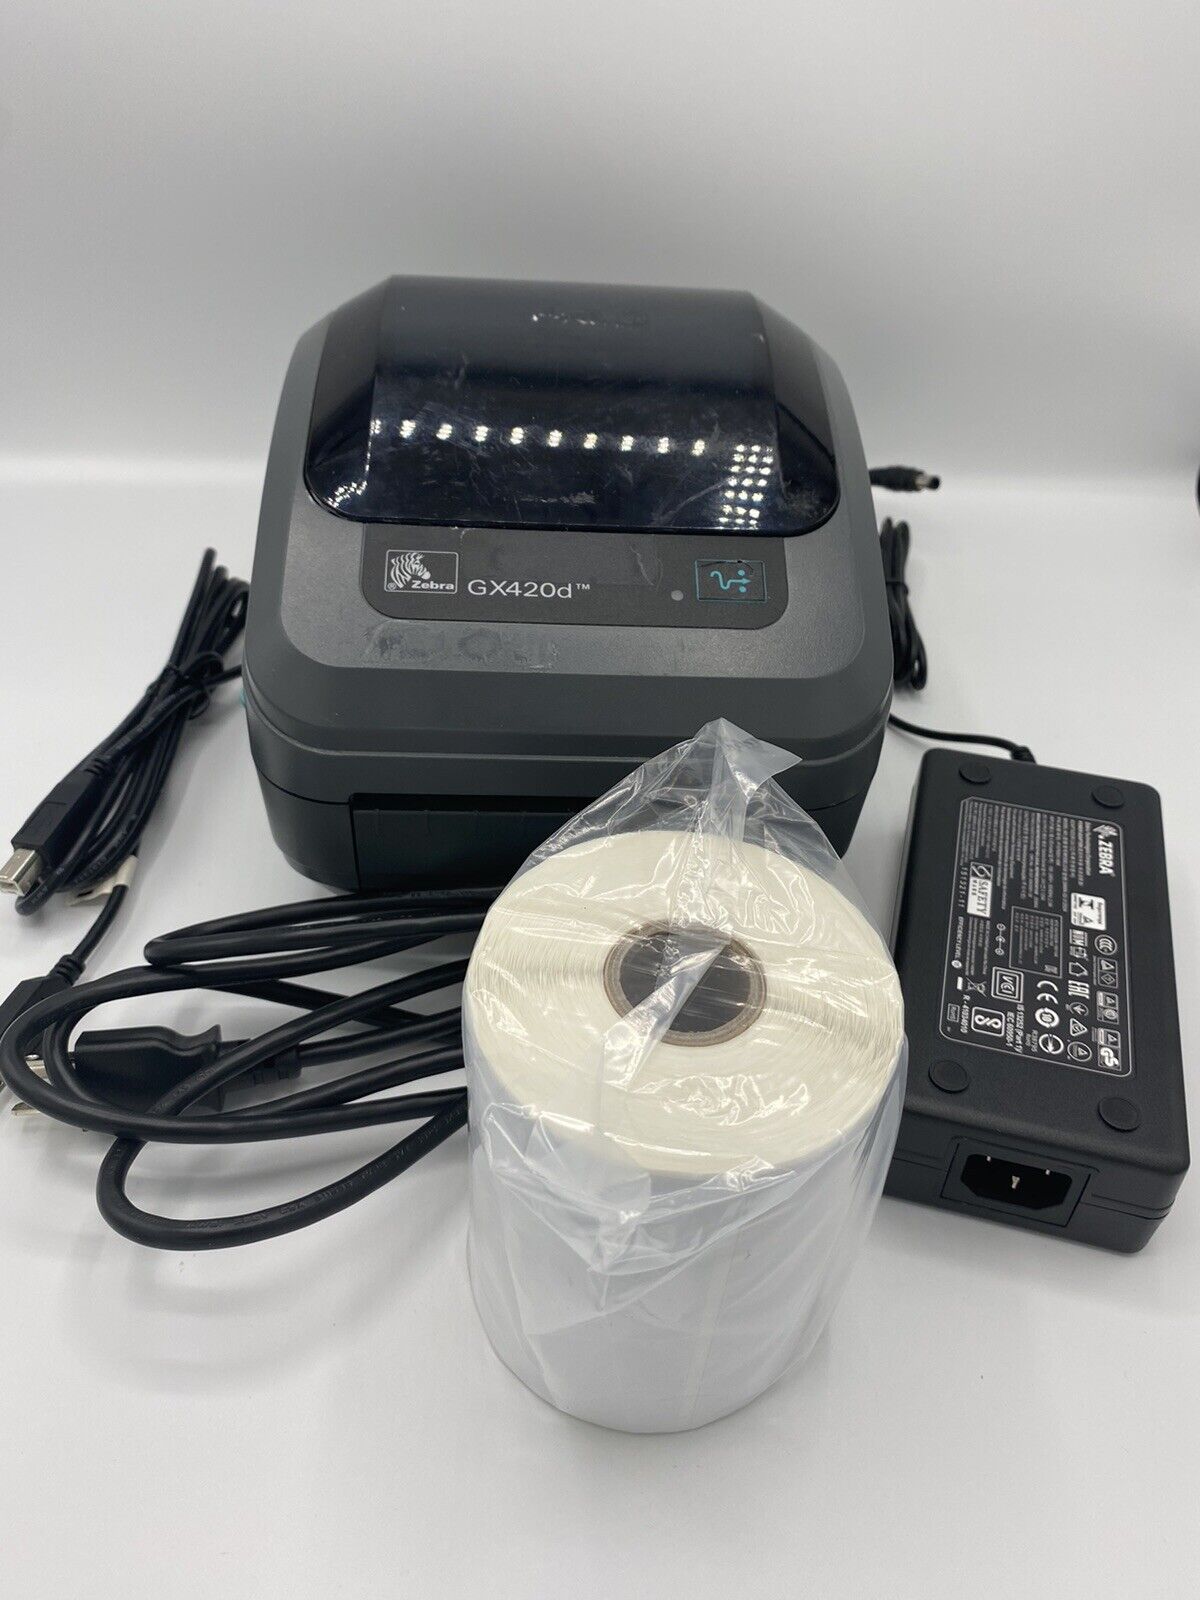 Zebra GX420d Thermal Label Printer w USB Paralell/Serial ports With Free labels